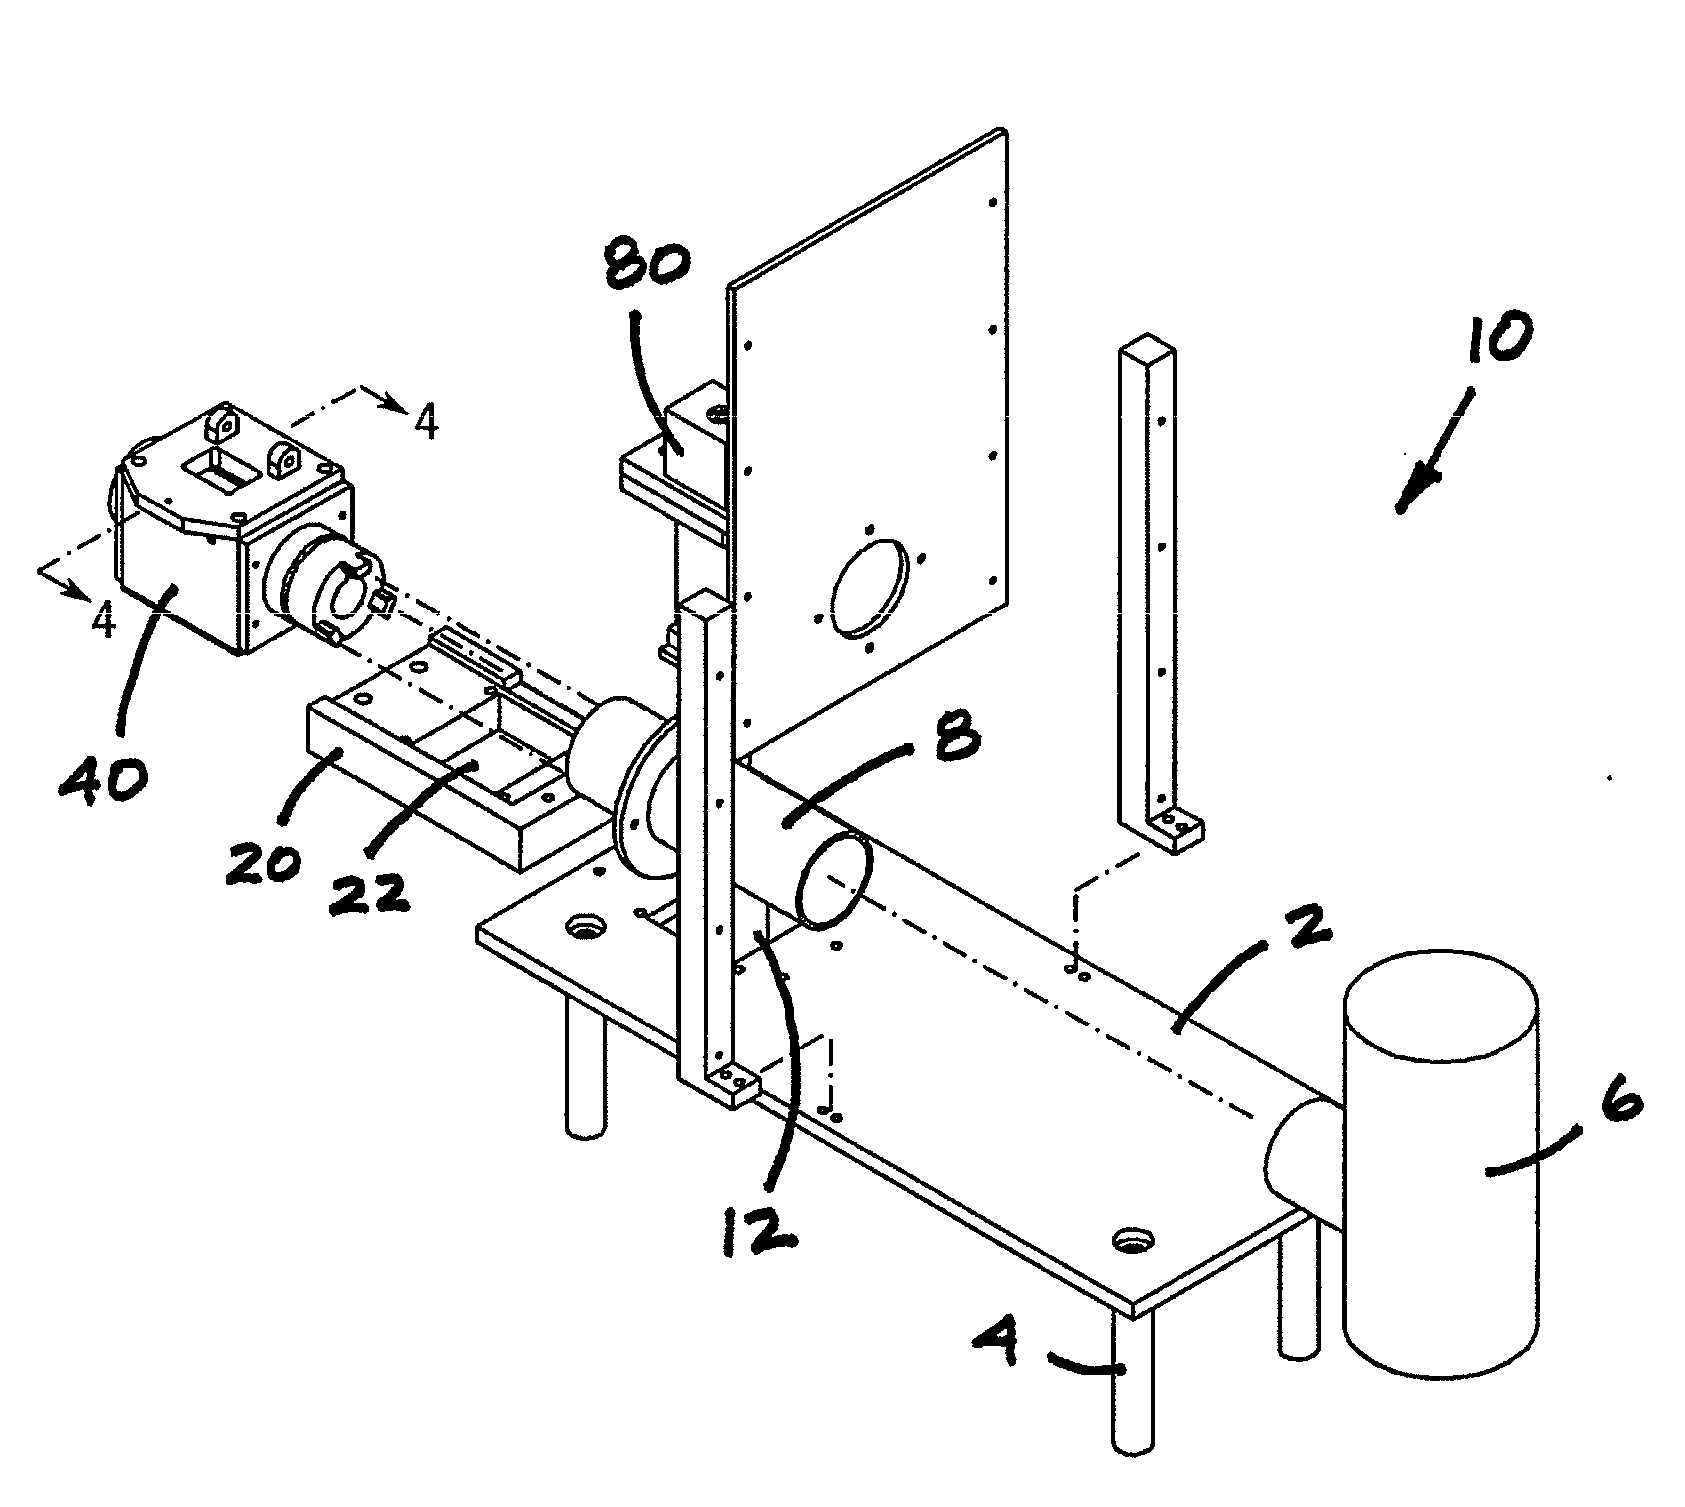 Bone mill assembly for use with cortical and cancellous bone